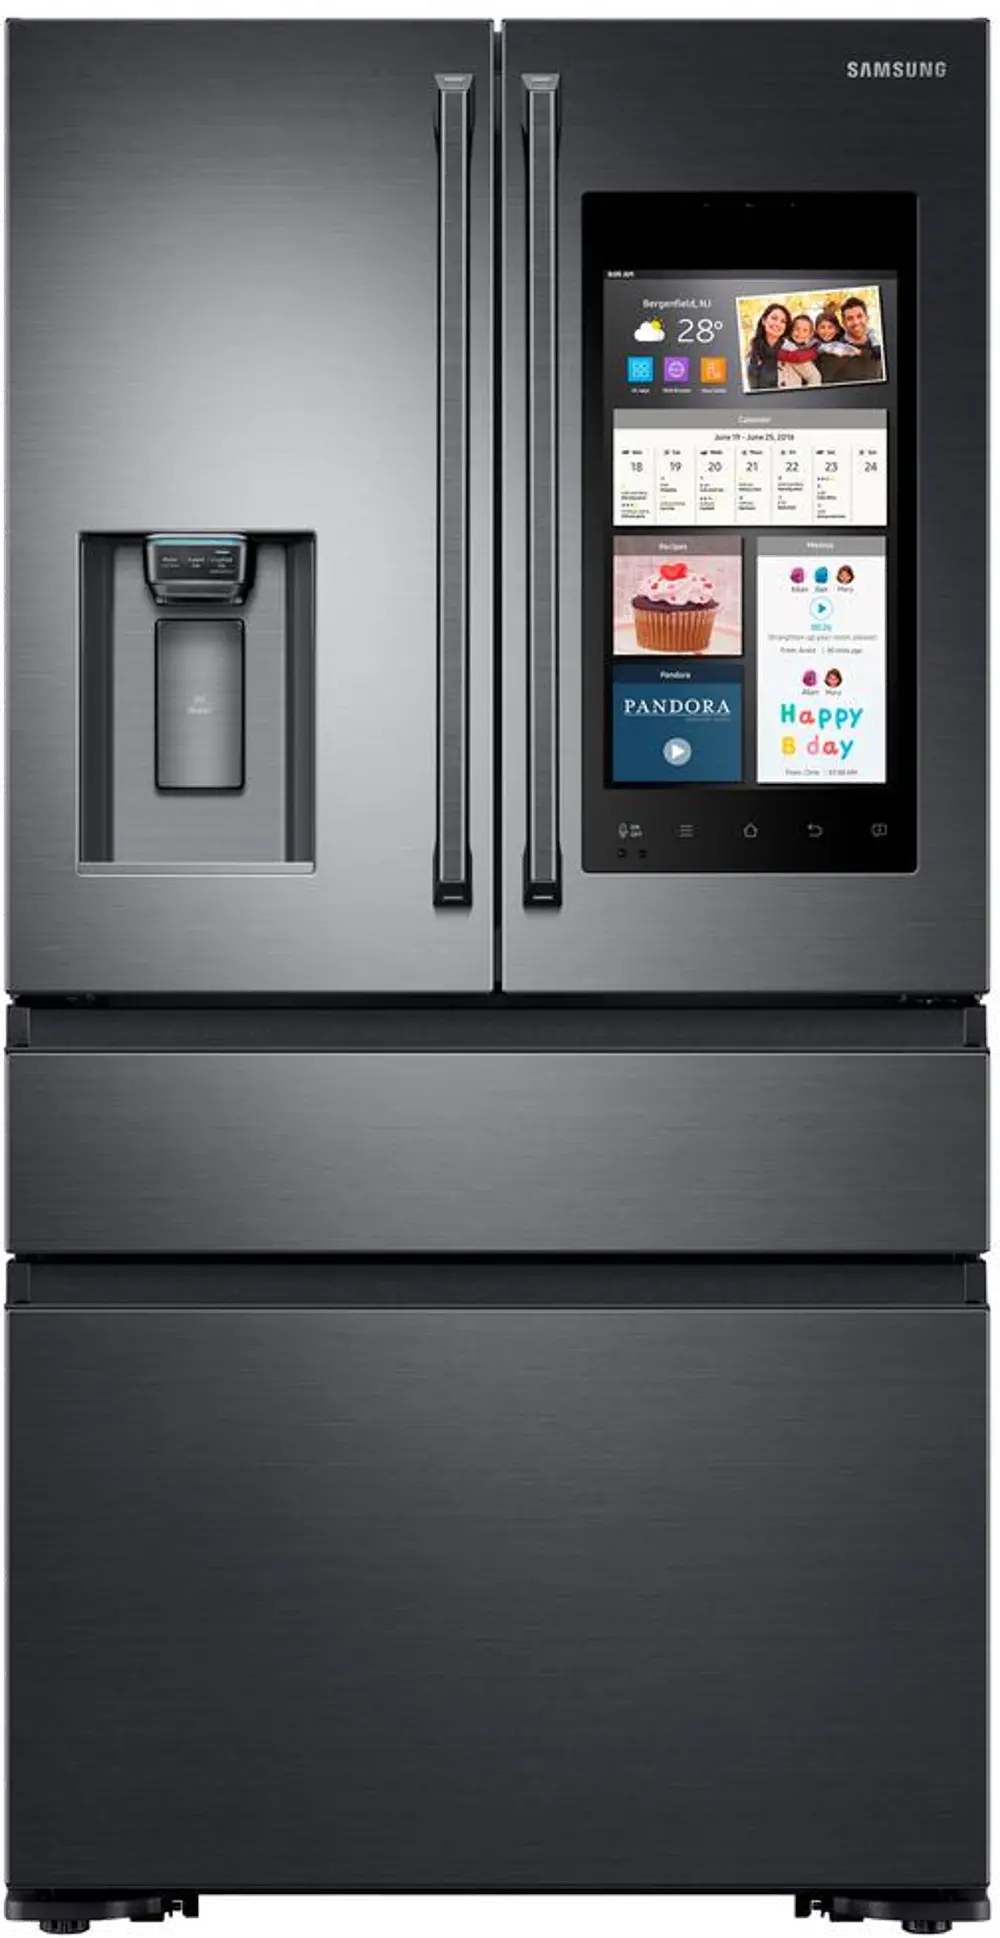 RF23M8590SG Samsung Counter Depth French Door Smart Refrigerator with Family Hub - 22.2 cu. ft., 36 Inch Black Stainless Steel-1